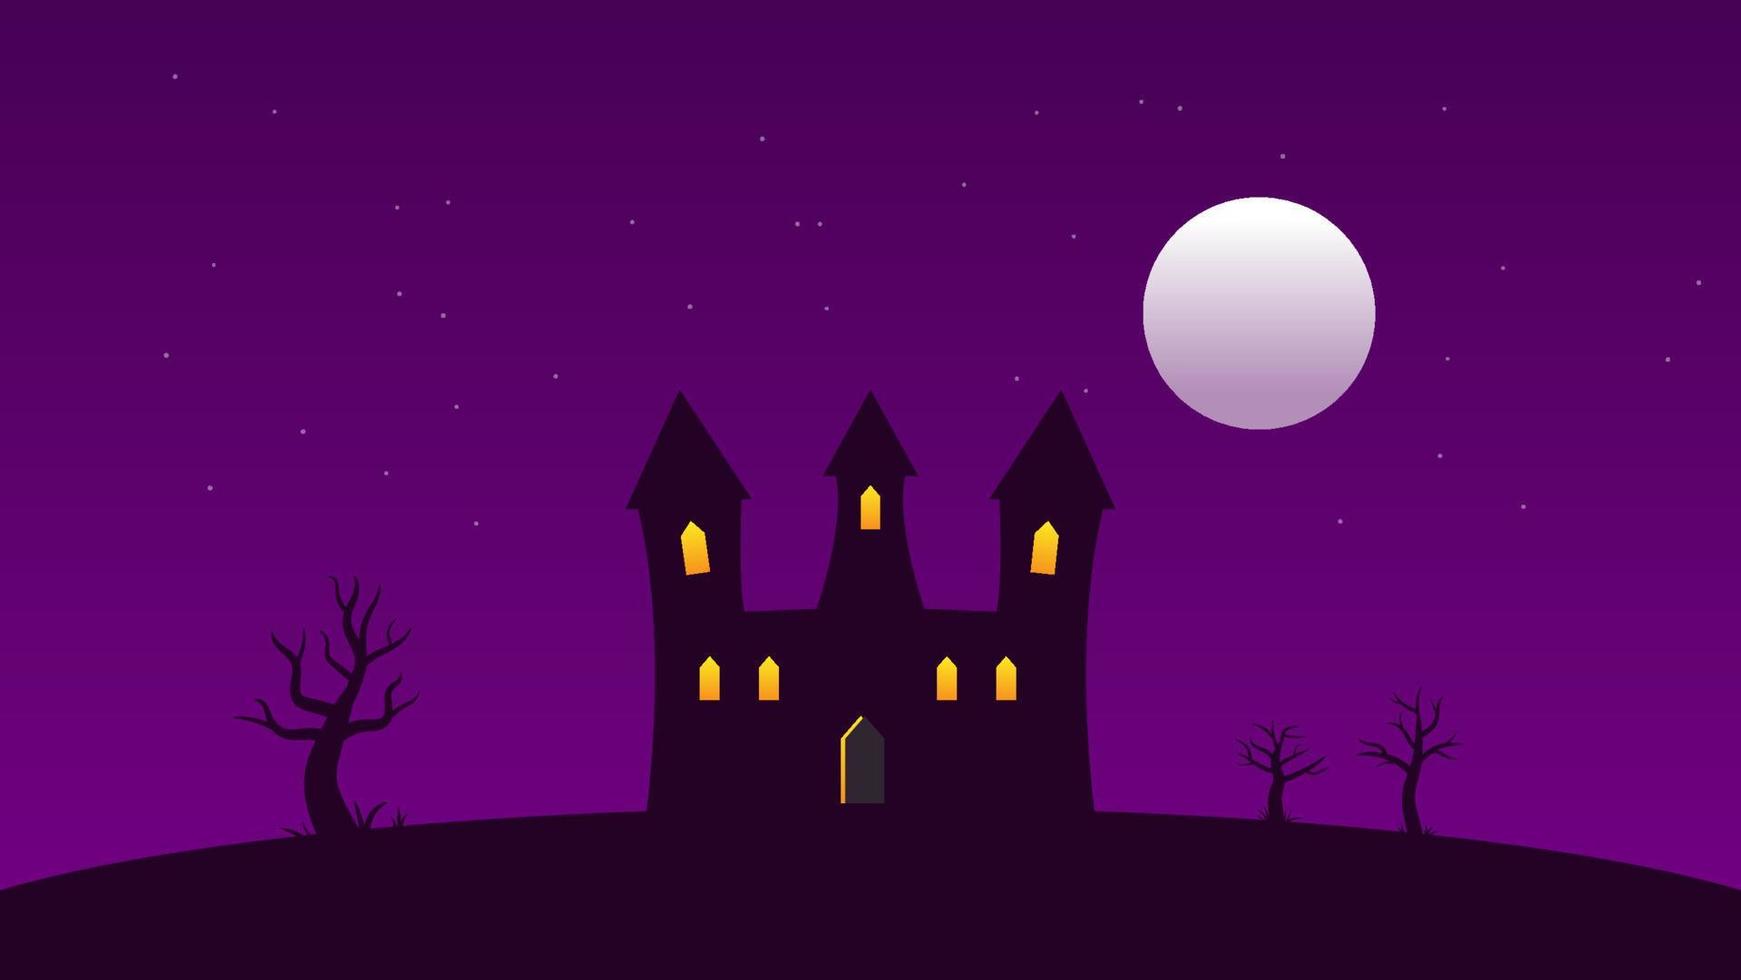 castle with lighting window on hills with trees and full moon and sparkling white star on dark sky. landscape cartoon scene with copy space vector